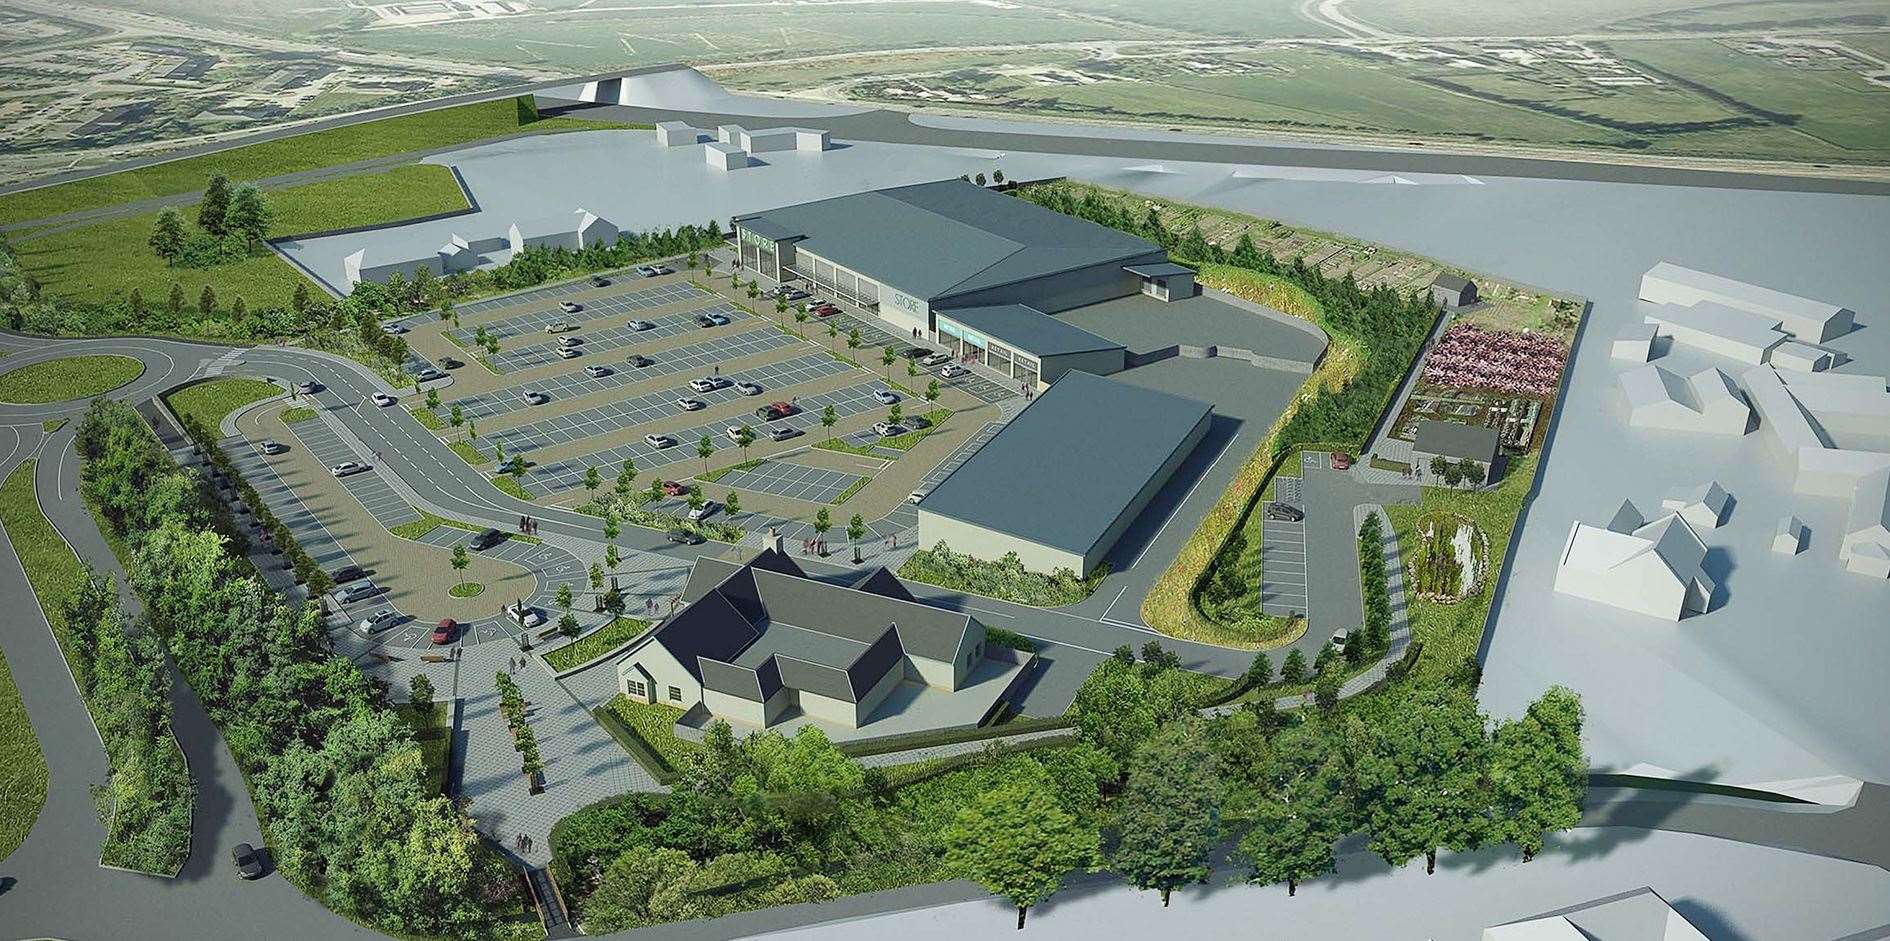 Developers were hoping to move ahead with a major expansion at Inshes Retail Park in Inverness.